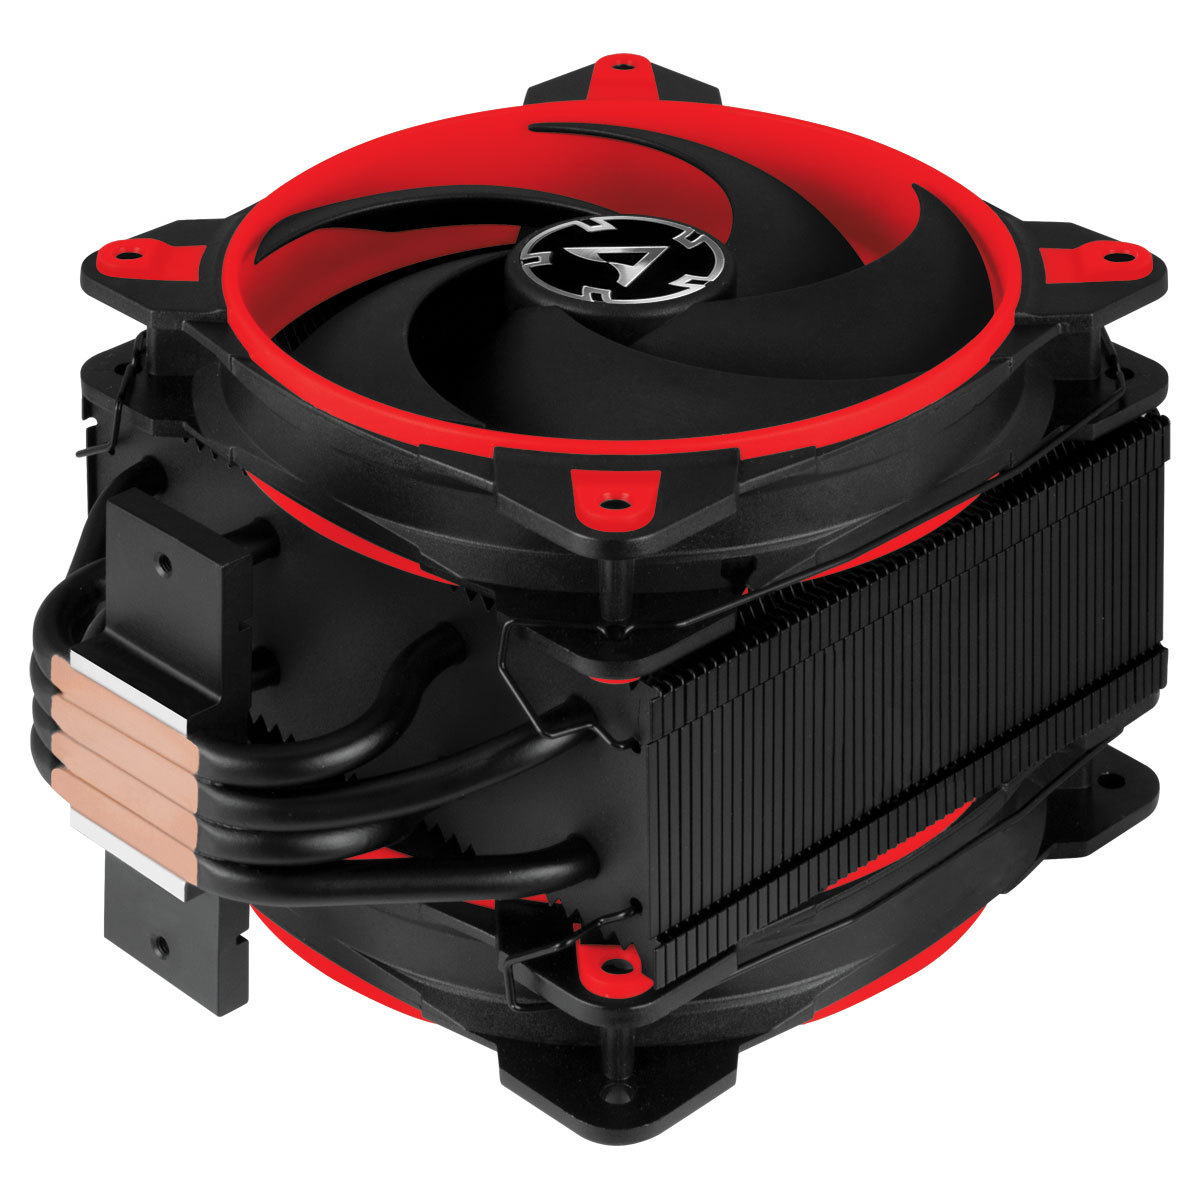  Arctic Cooling Freezer 34 eSports DUO Red (ACFRE00060A)